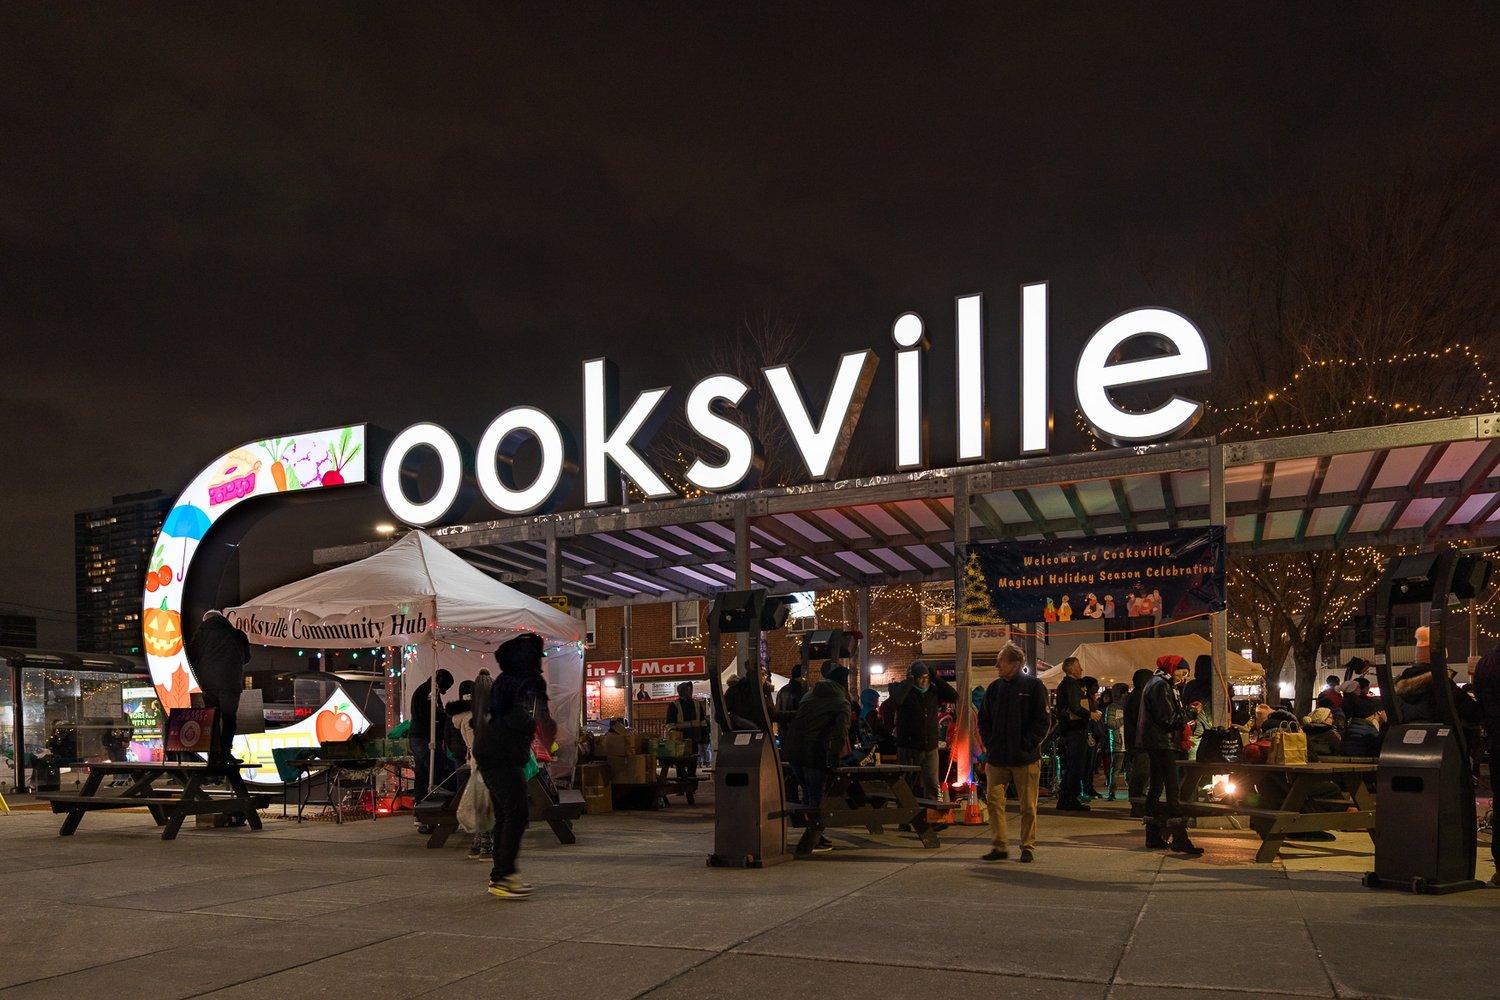 The Cooksville Sign